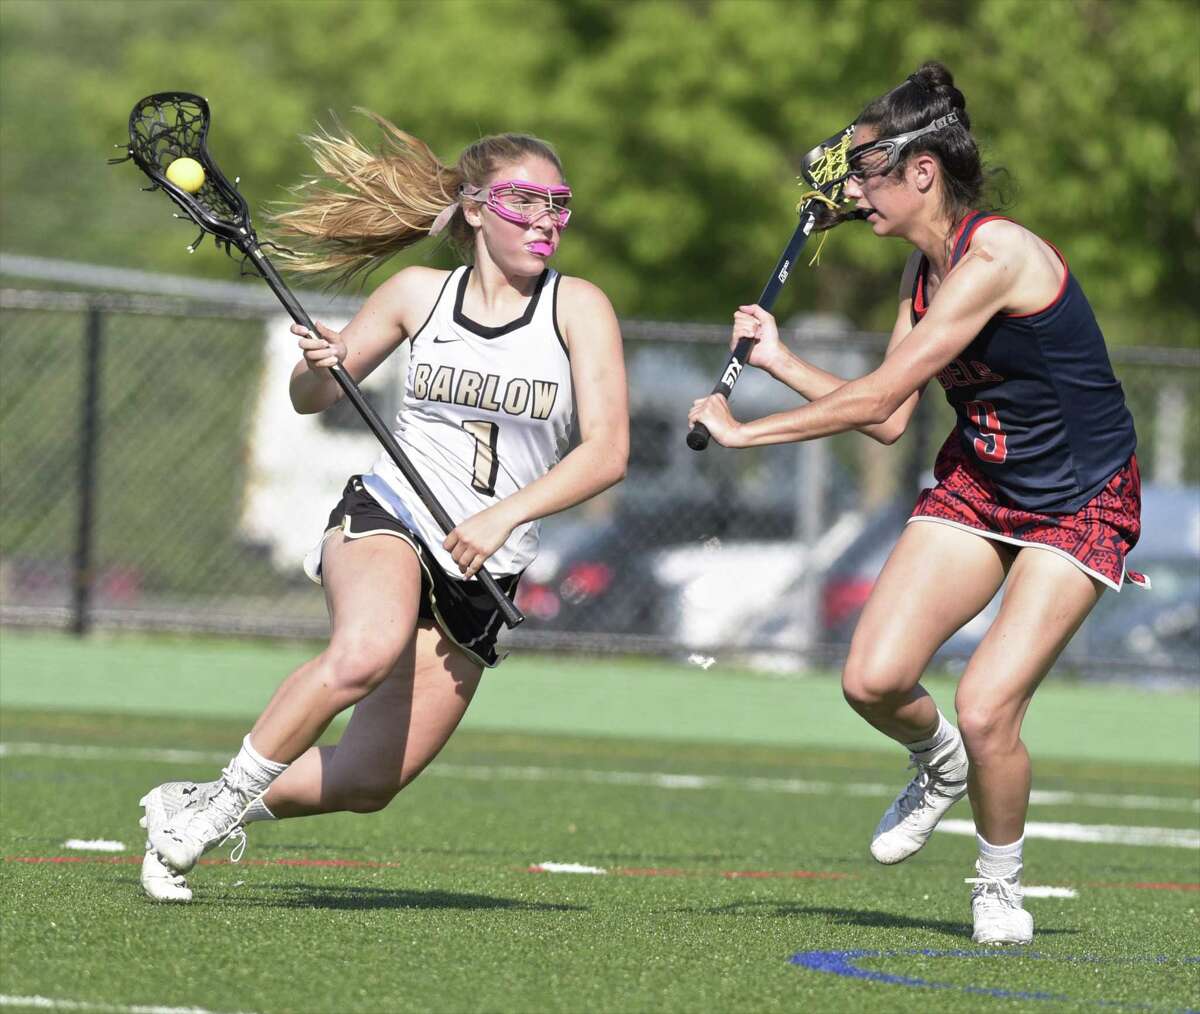 New Fairfield girls hold off Barlow to capture SWC lacrosse crown